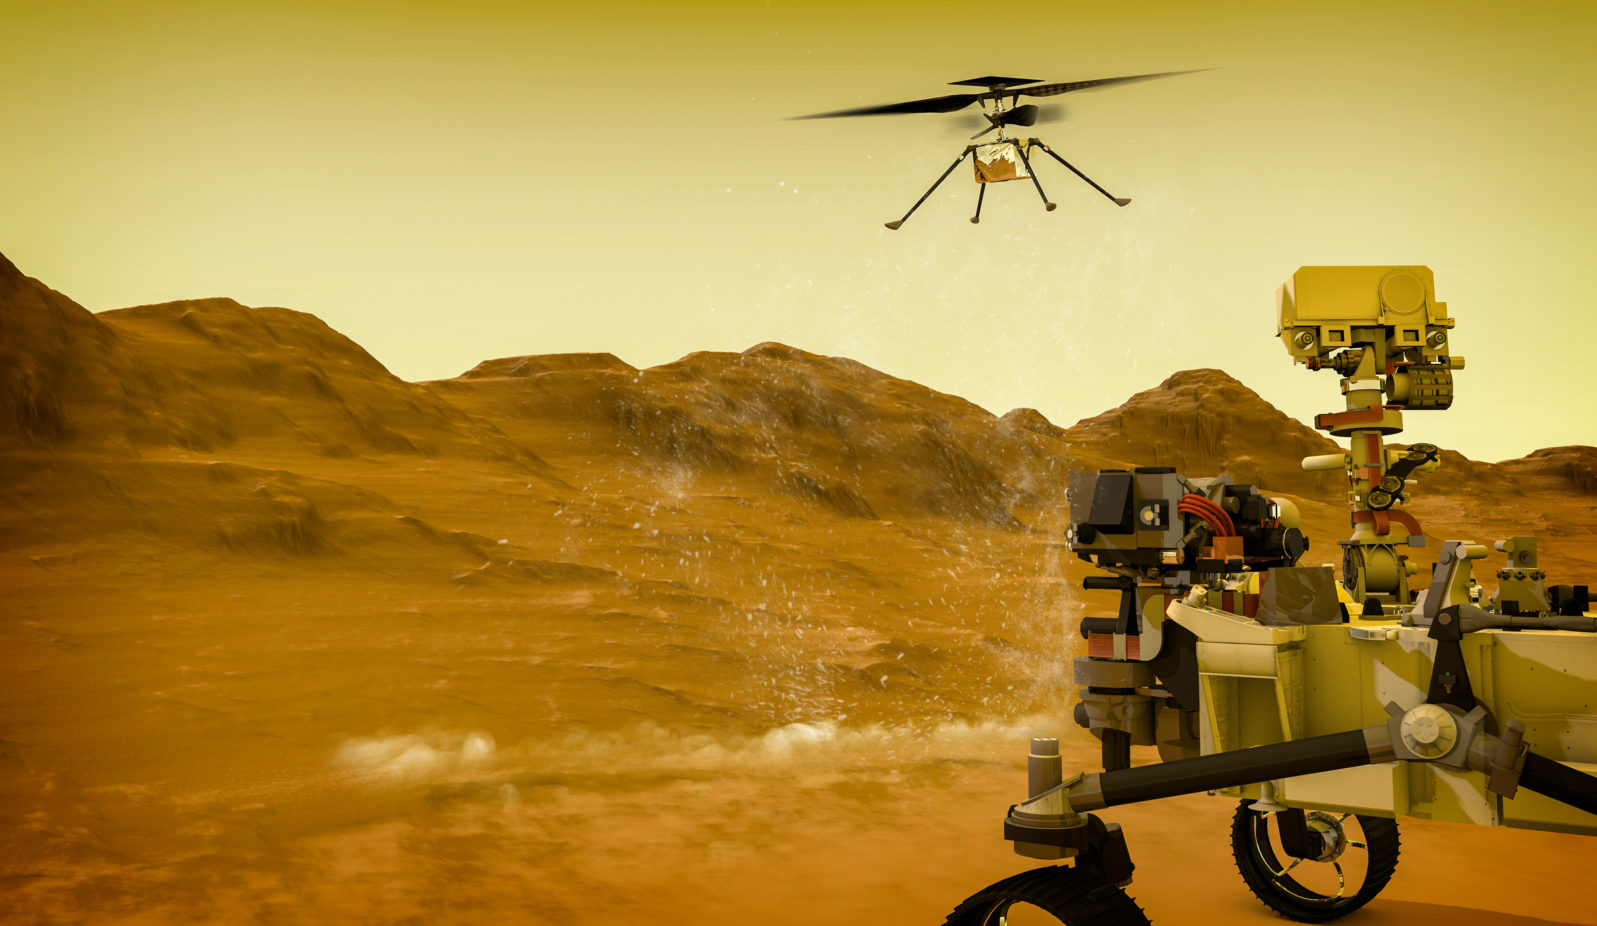 The Ingenuity drone-helicopter has separated from the Perseverance rover on Mars and prepares for its first flight. 3d render. Element of this image are furnished by NASA